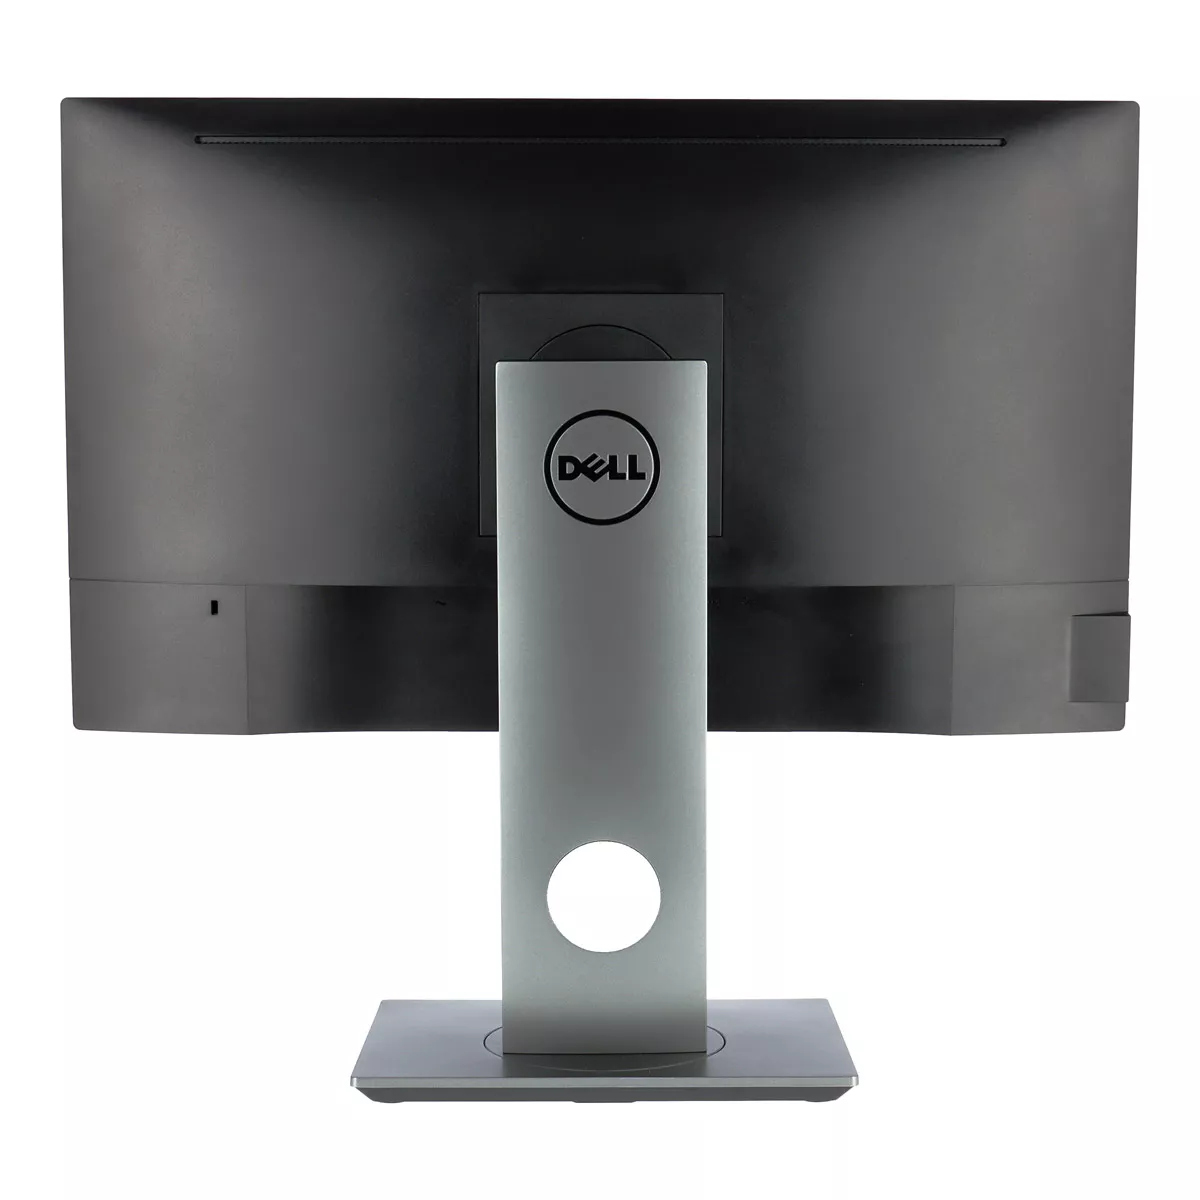 Dell P2217h 21,5 Zoll LED A+